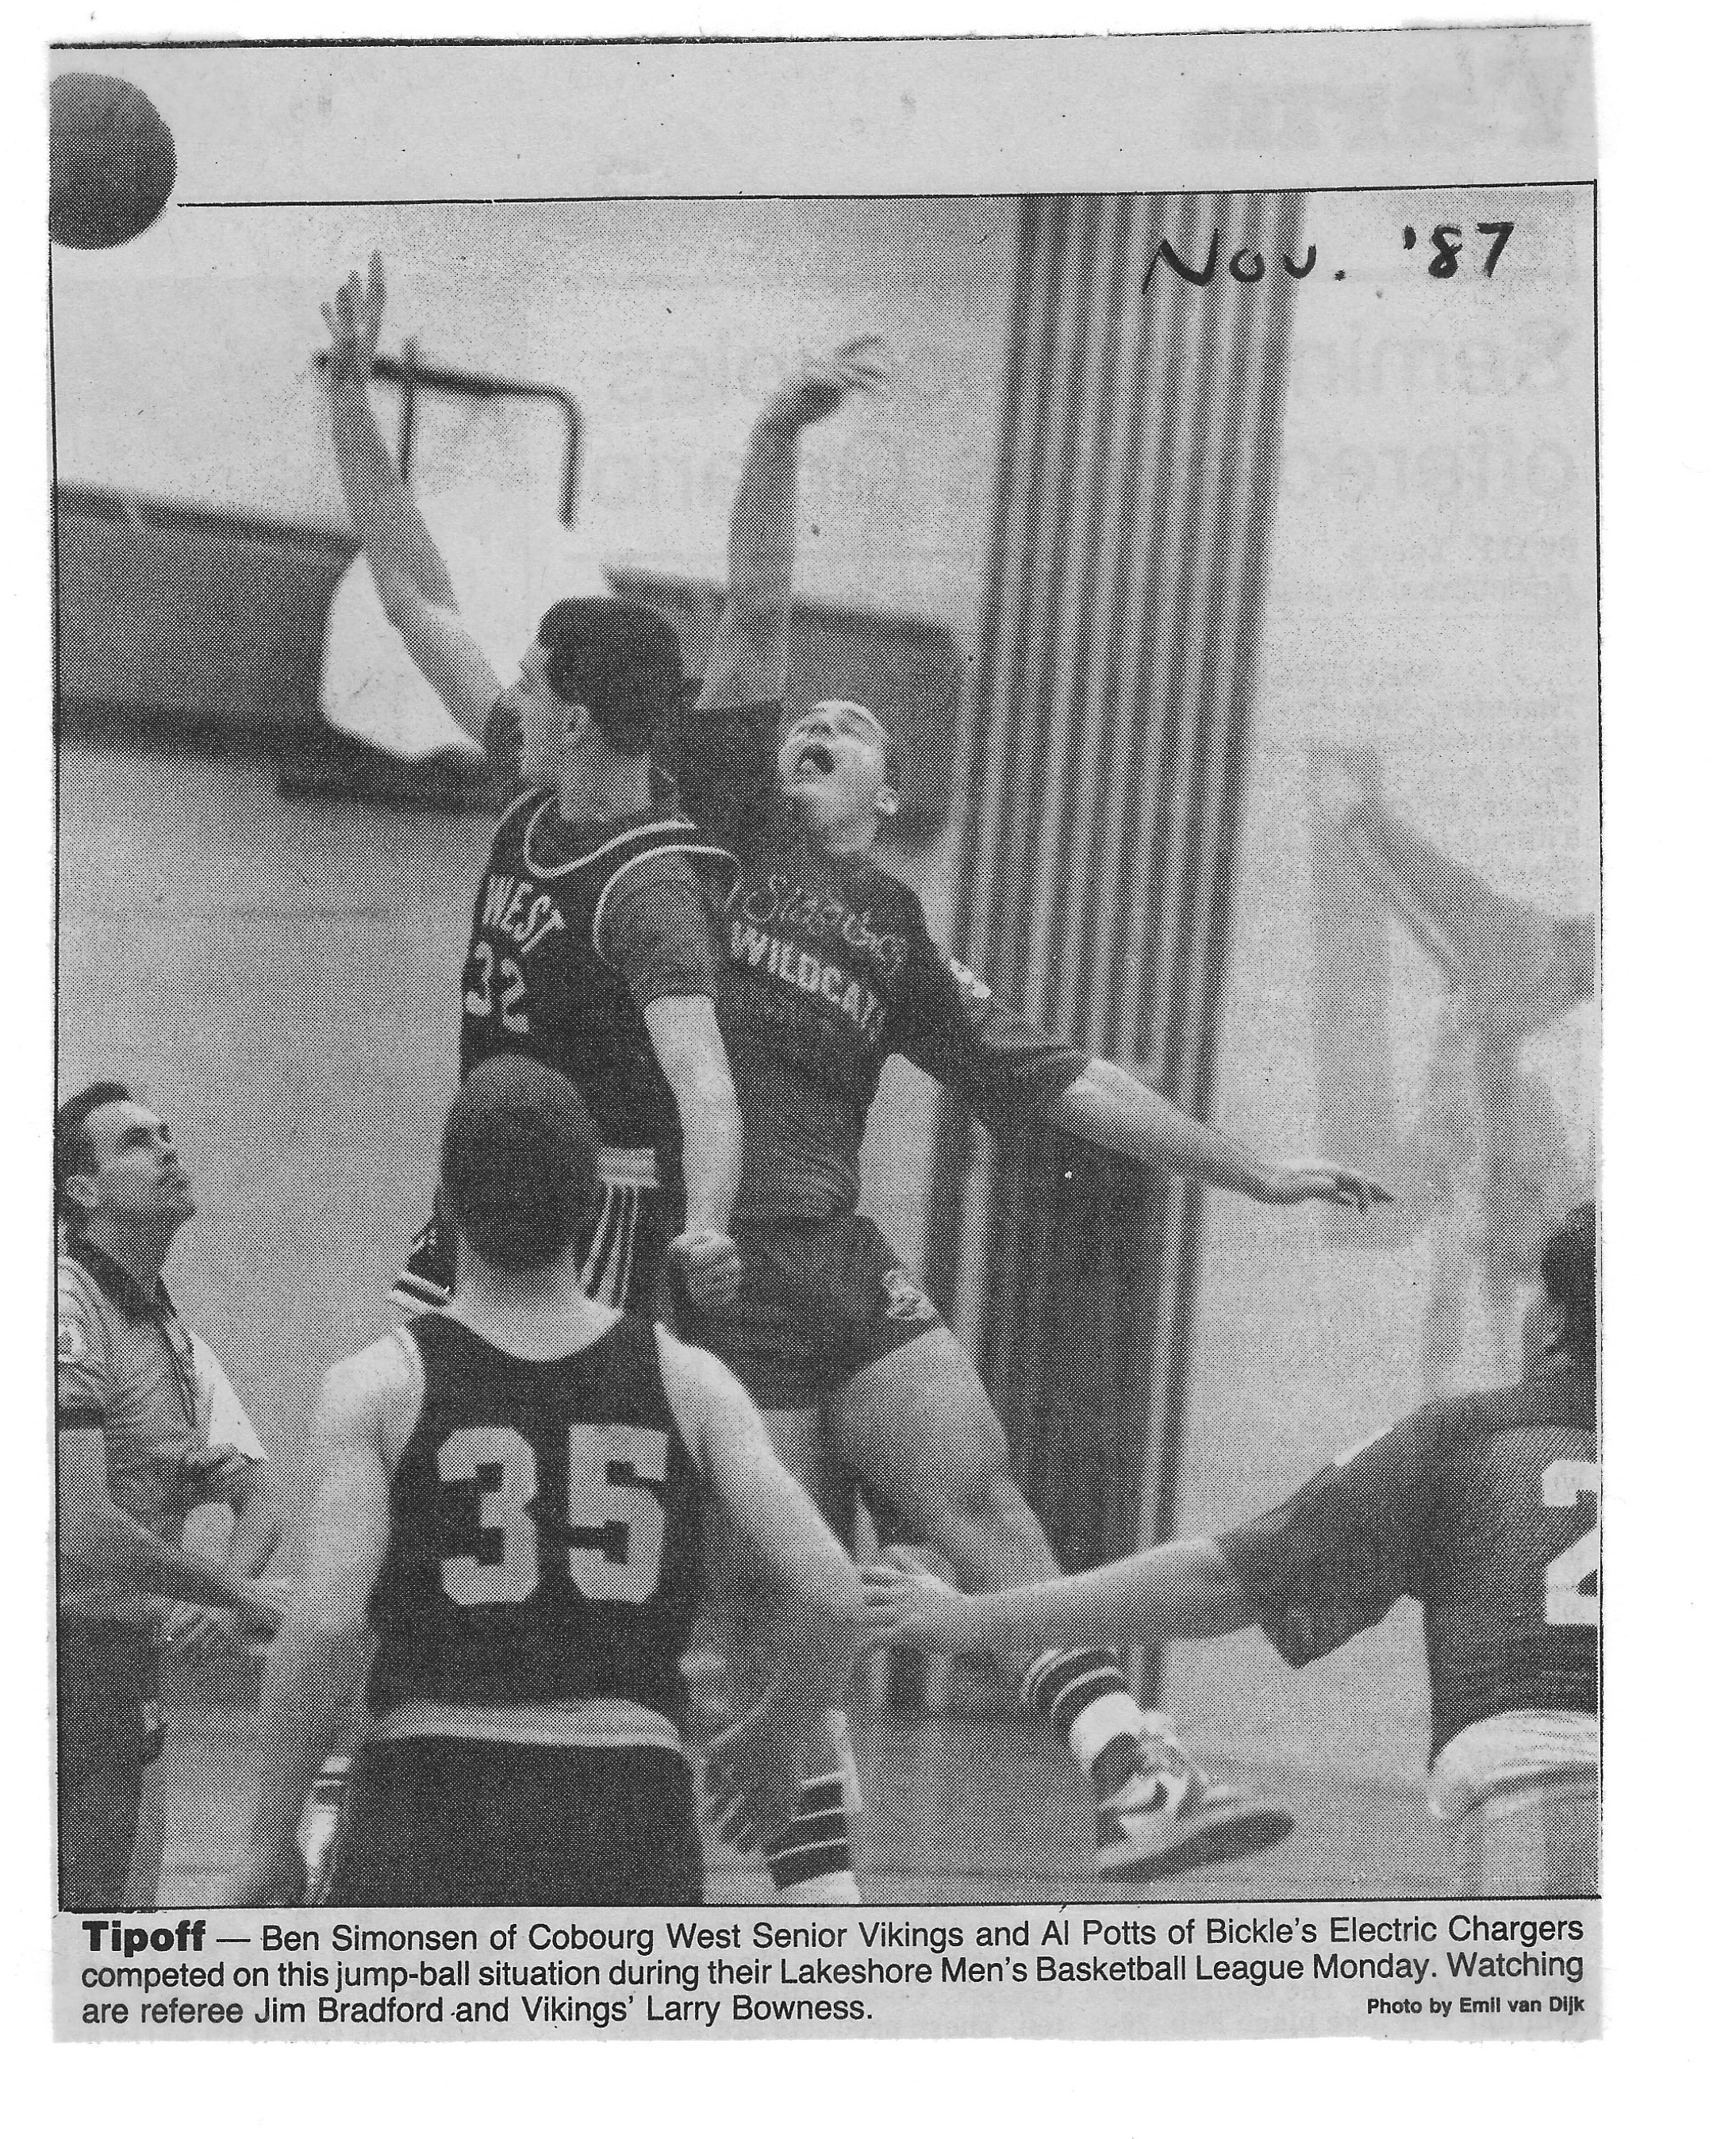 1987-11-01 Basketball -Lakeshore Mens -West Senior Vikings vs Bickle's Electric Chargers